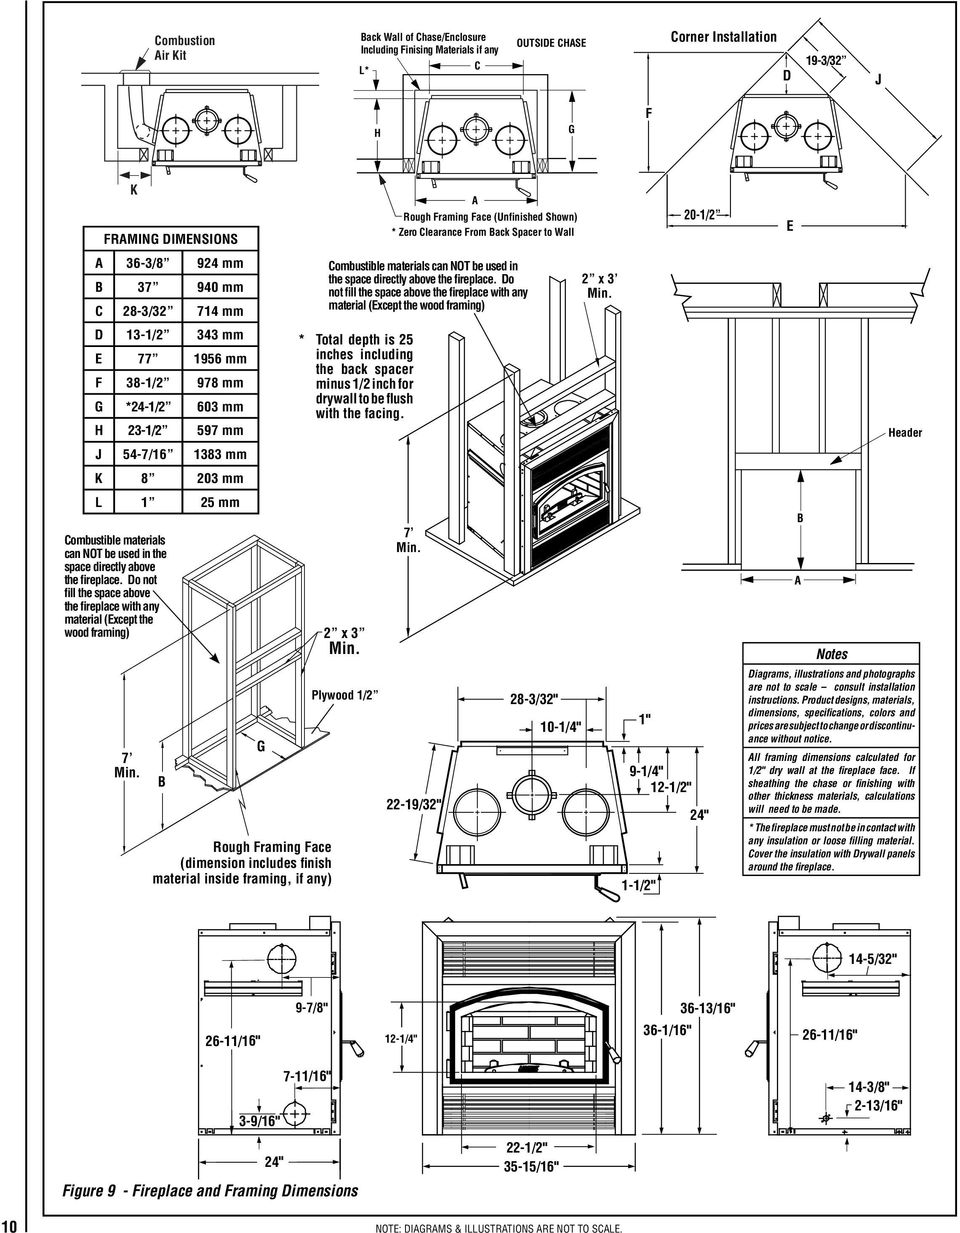 fireplace. Do not fill the space above the fireplace with any material (Except the wood framing) 7 Min.